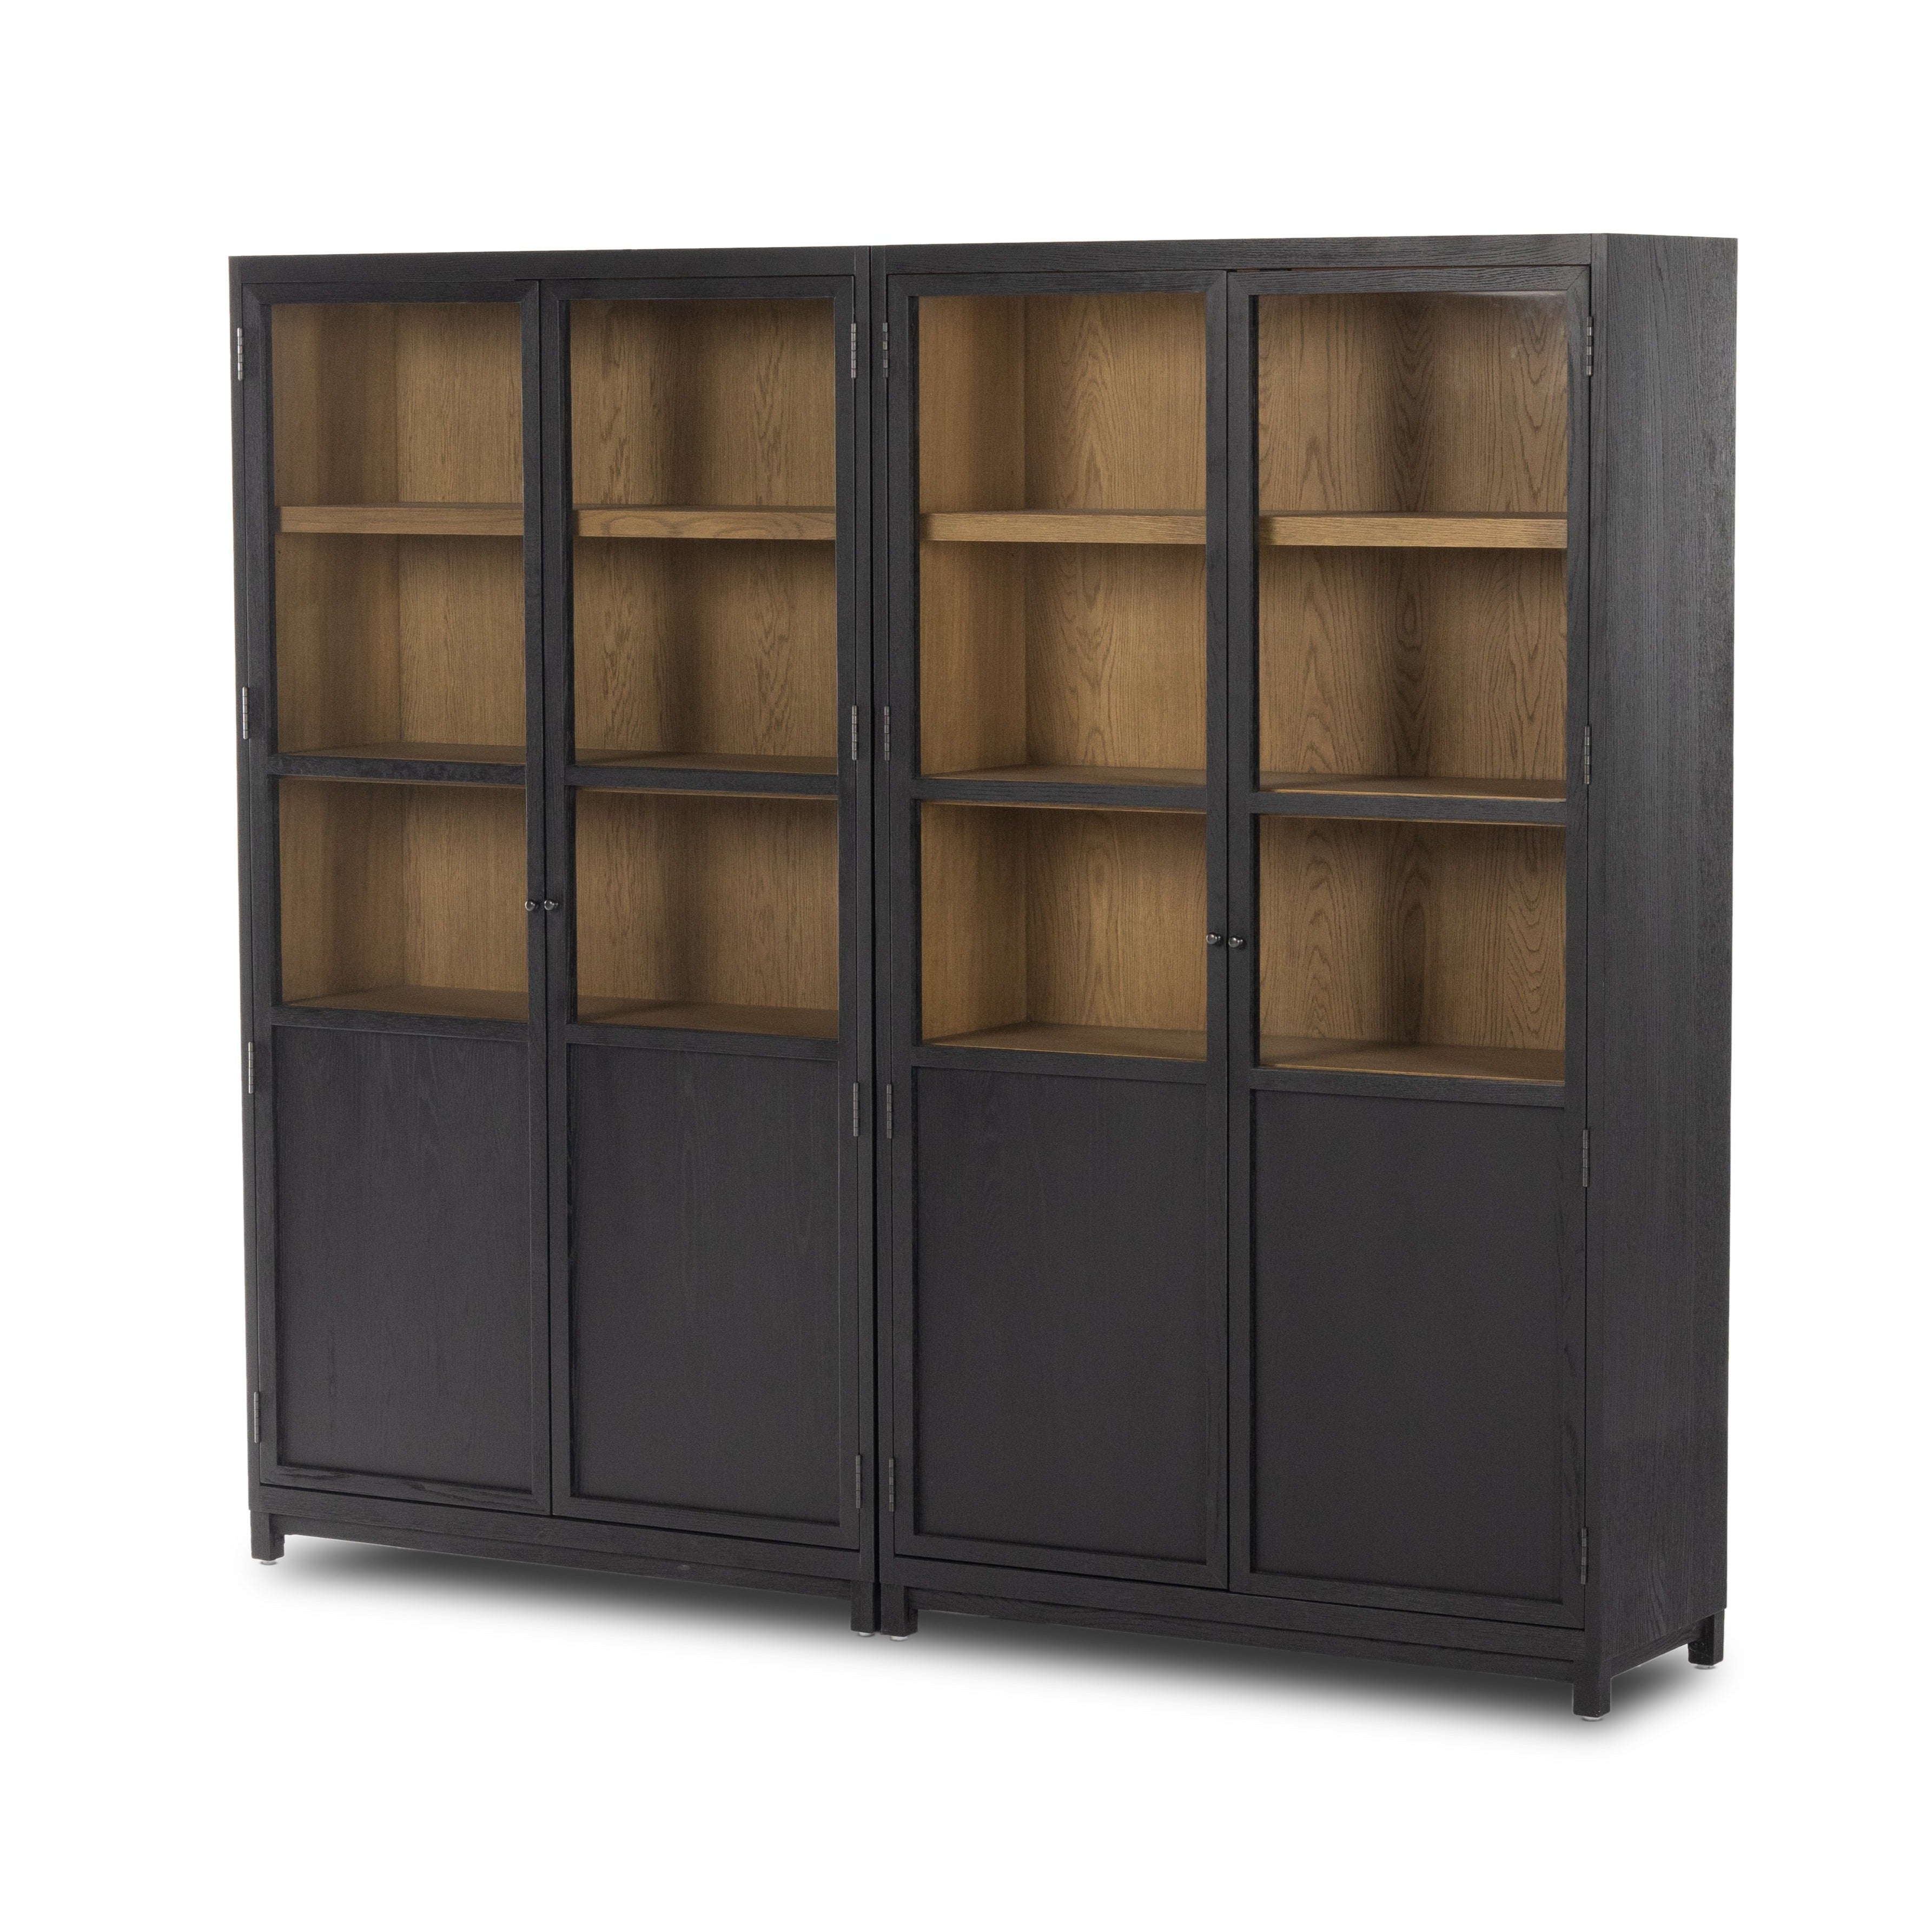 Nelly Panel And Glass Door Double Cabinet